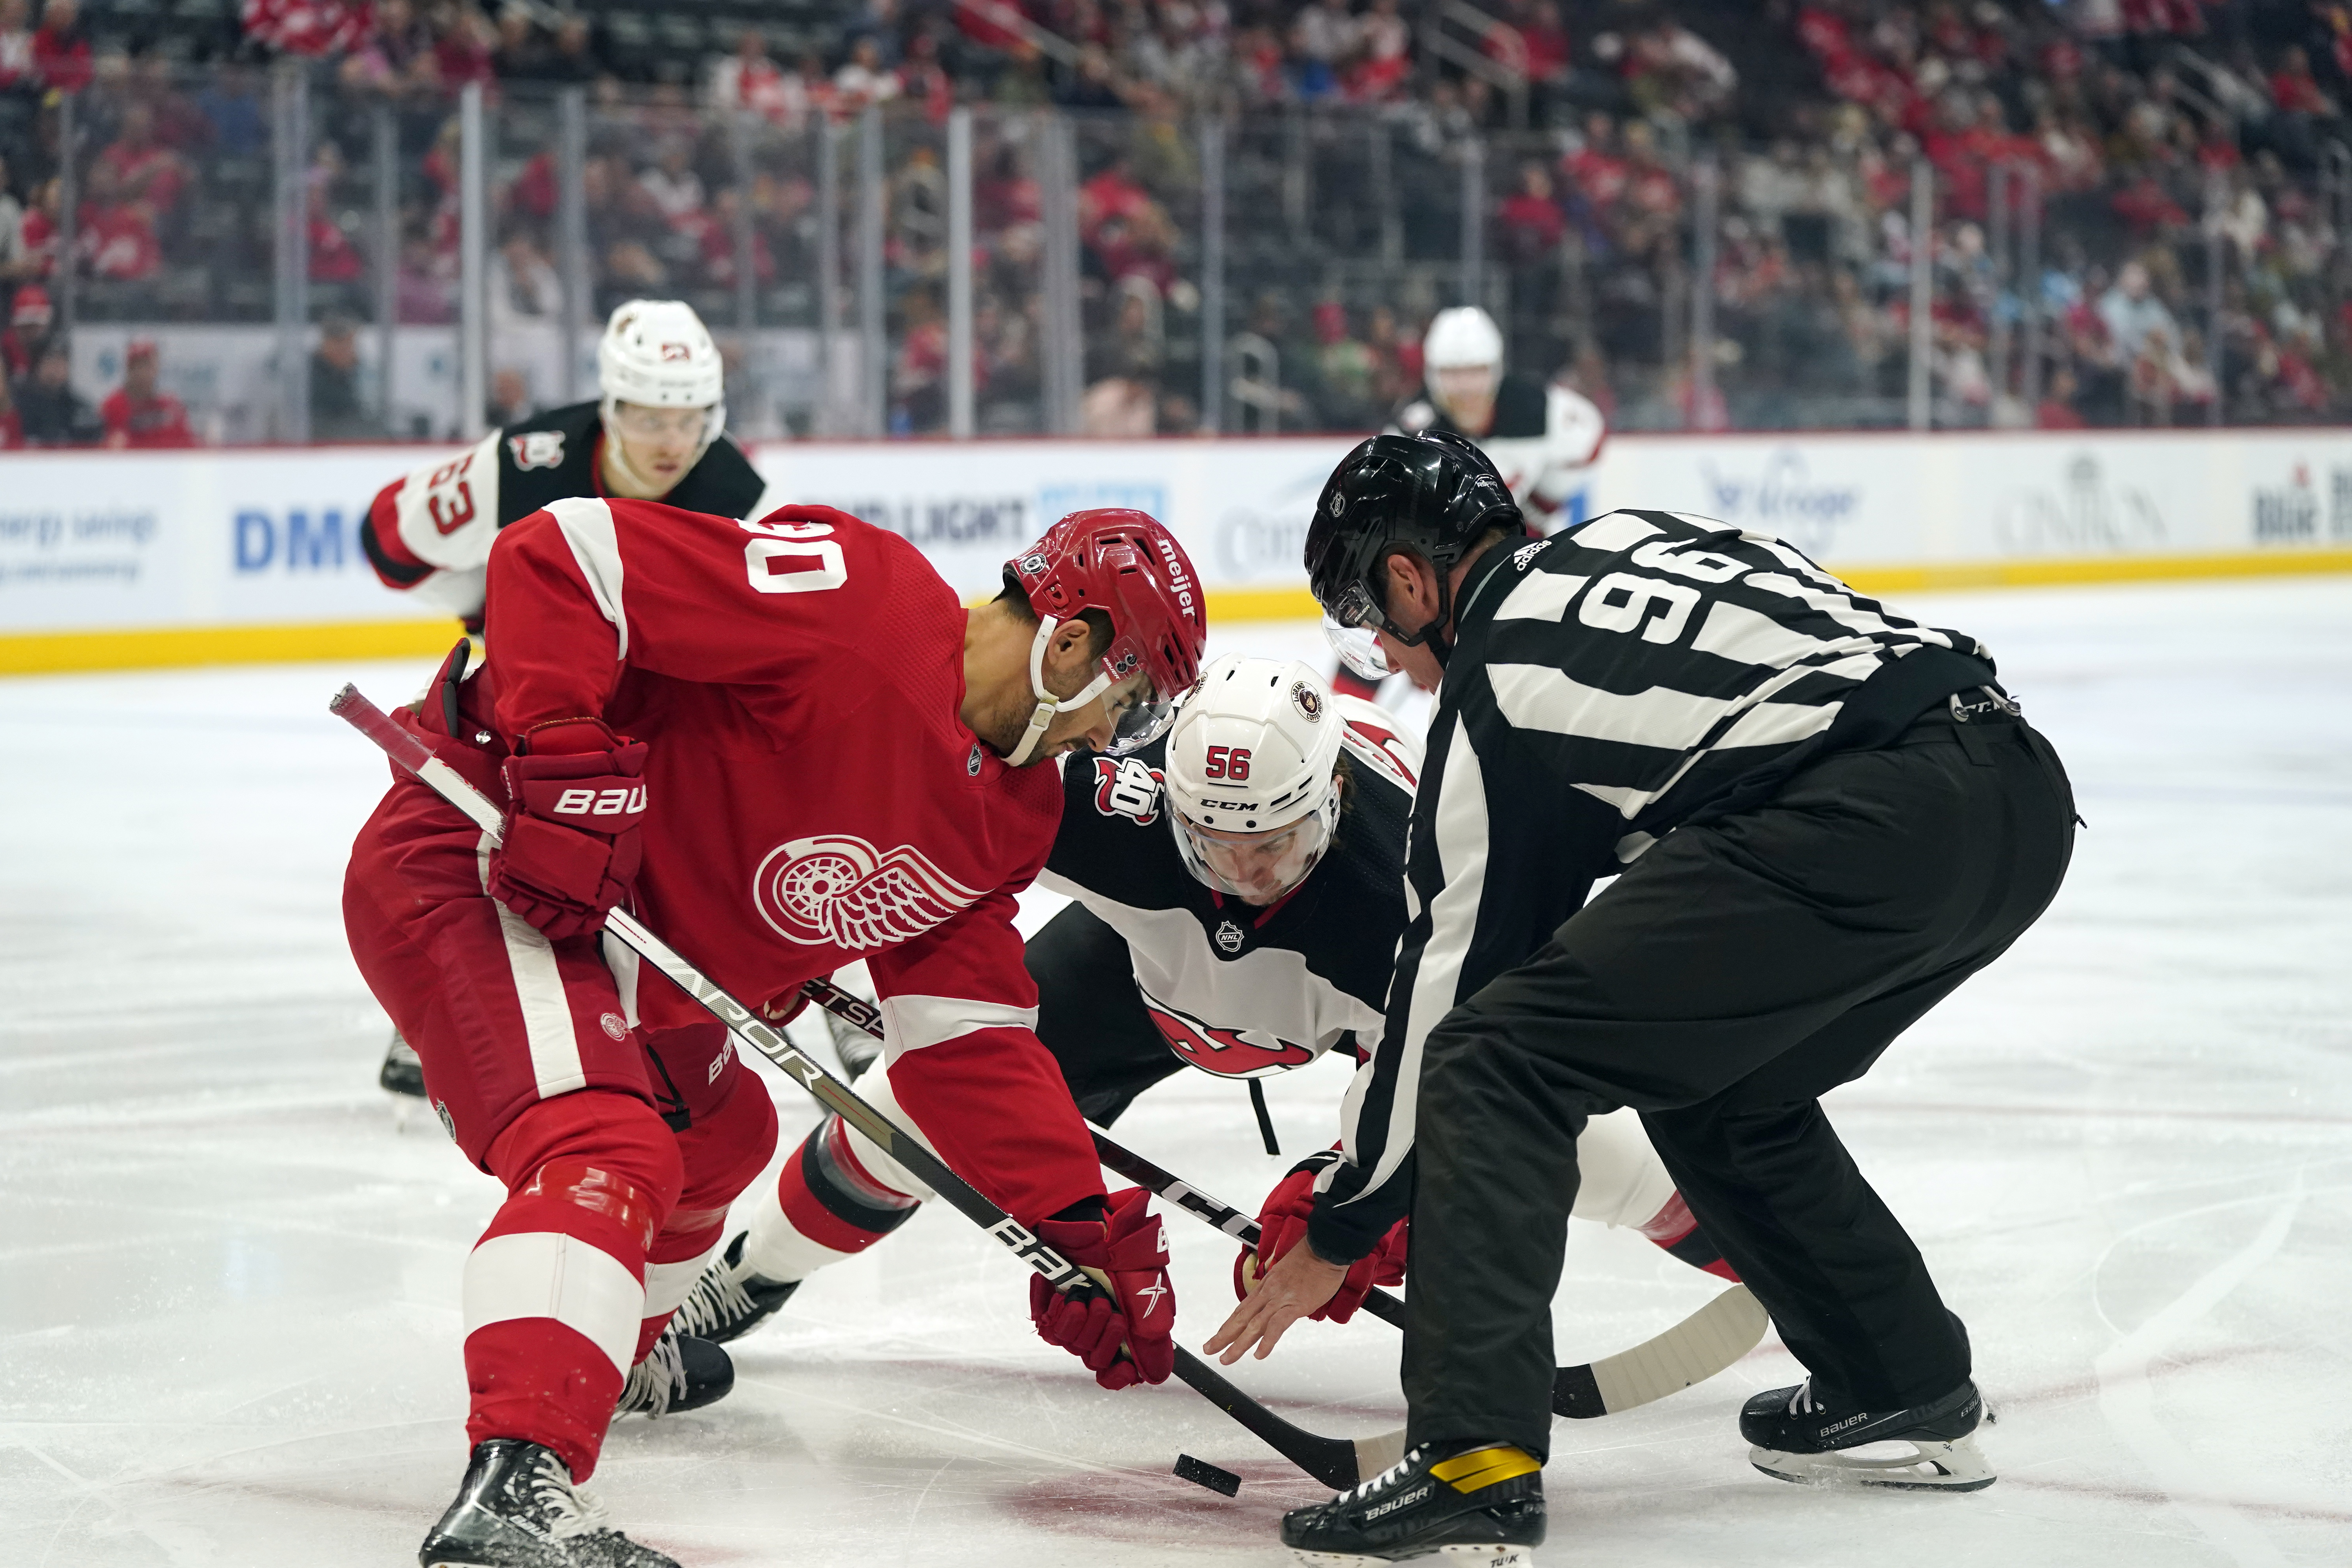 Detroit Red Wings vs New Jersey Devils: Game Preview, Lines, Odds